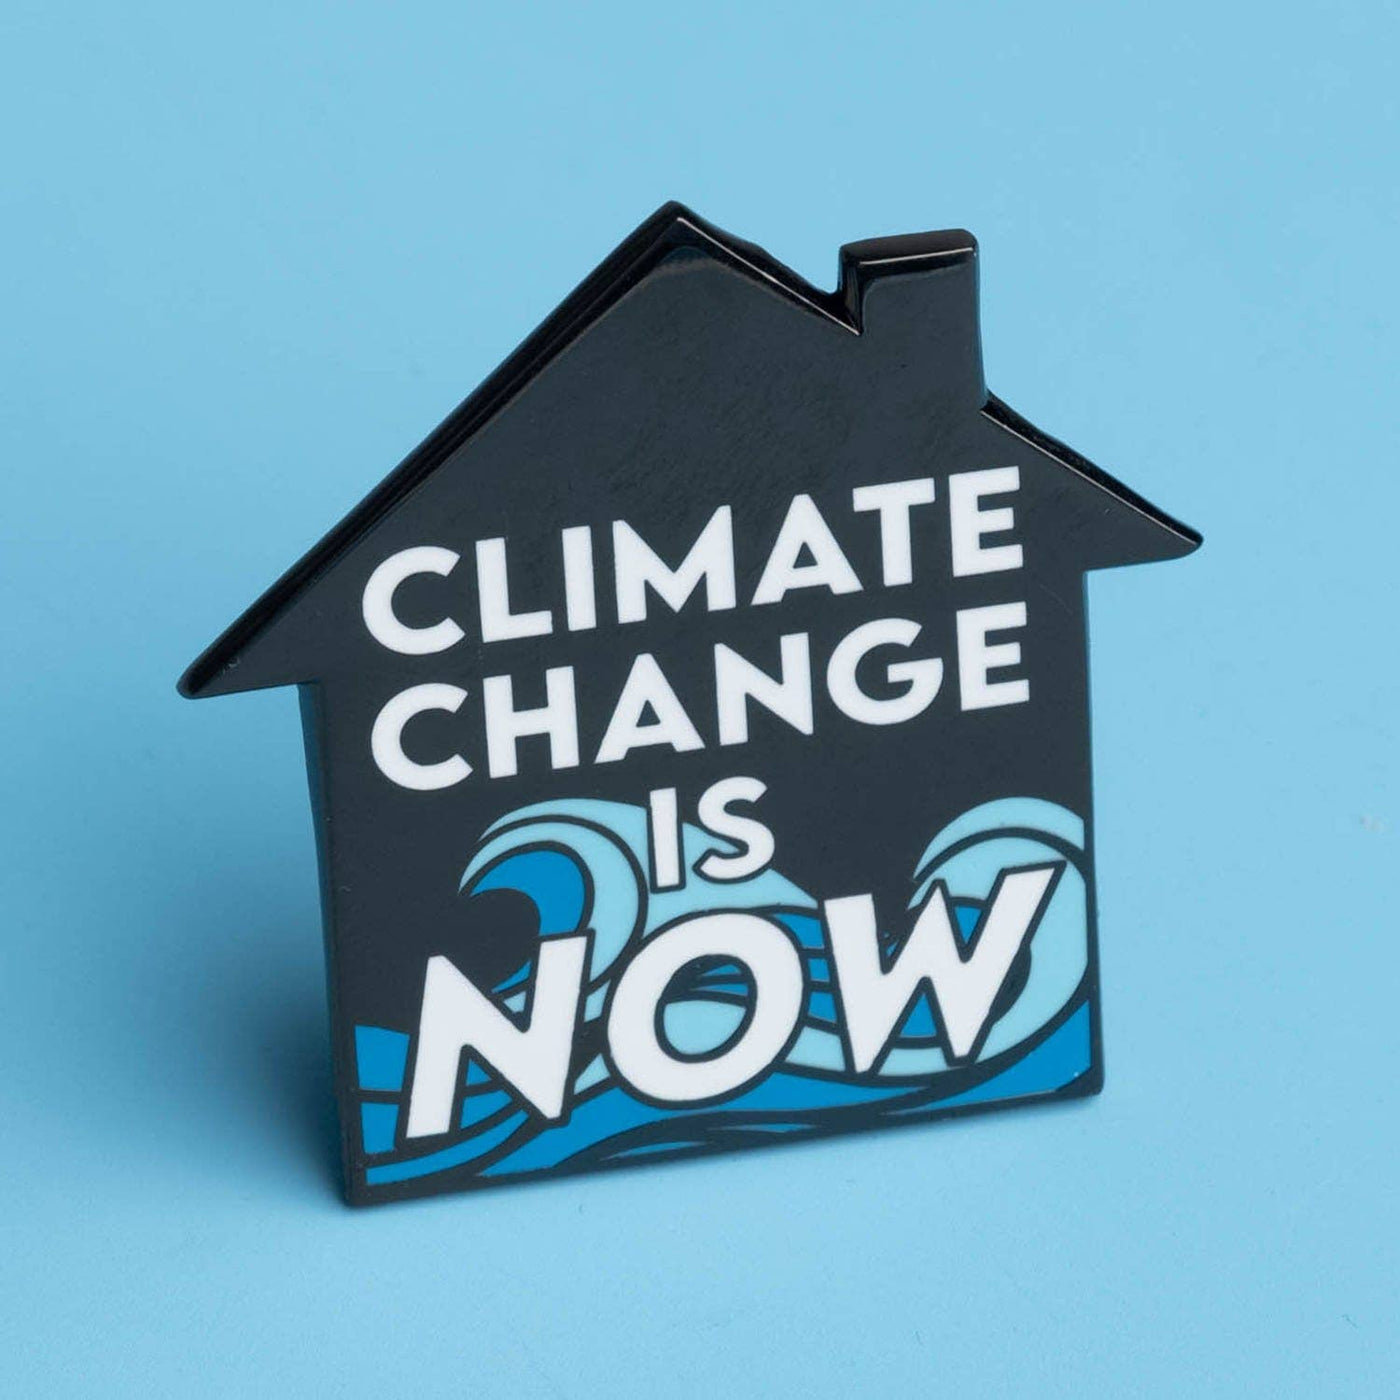 Climate Change is Now - Flood Pin